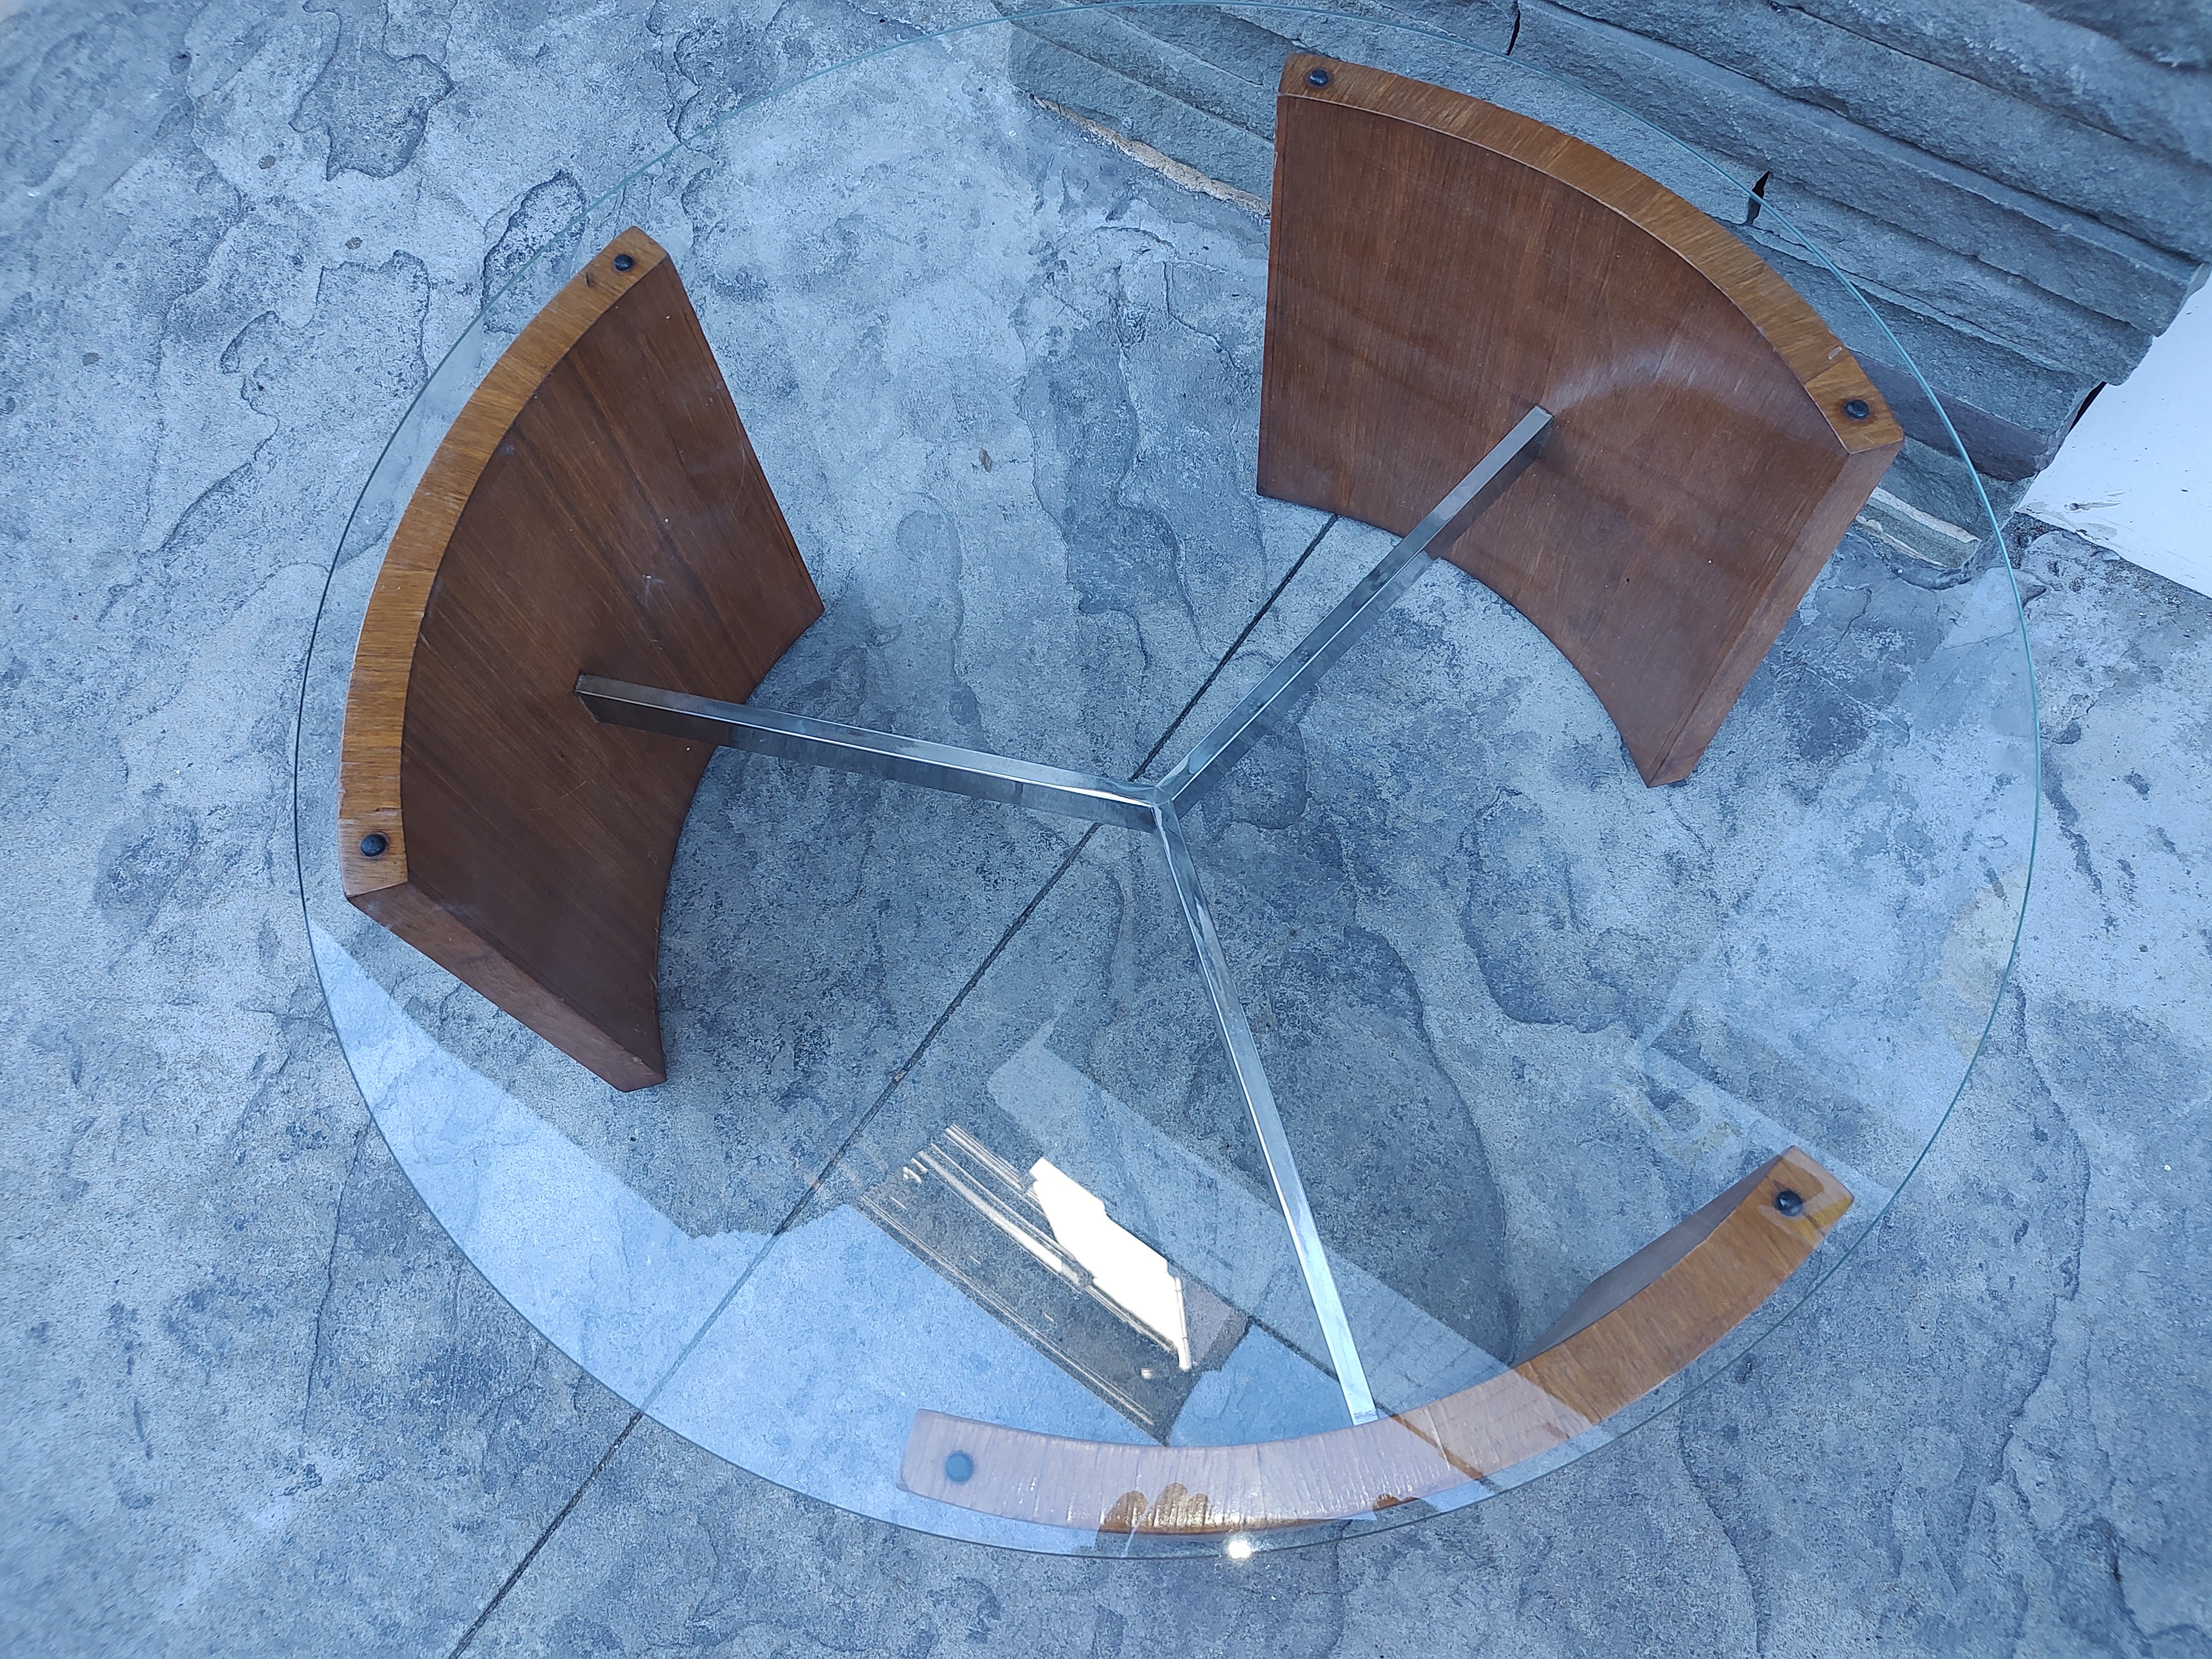 Fabulous Radius cocktail table by Vladimir Kagan. Three sided curved walnut slabs connected by a chromed steel spoke. Glass top is 30